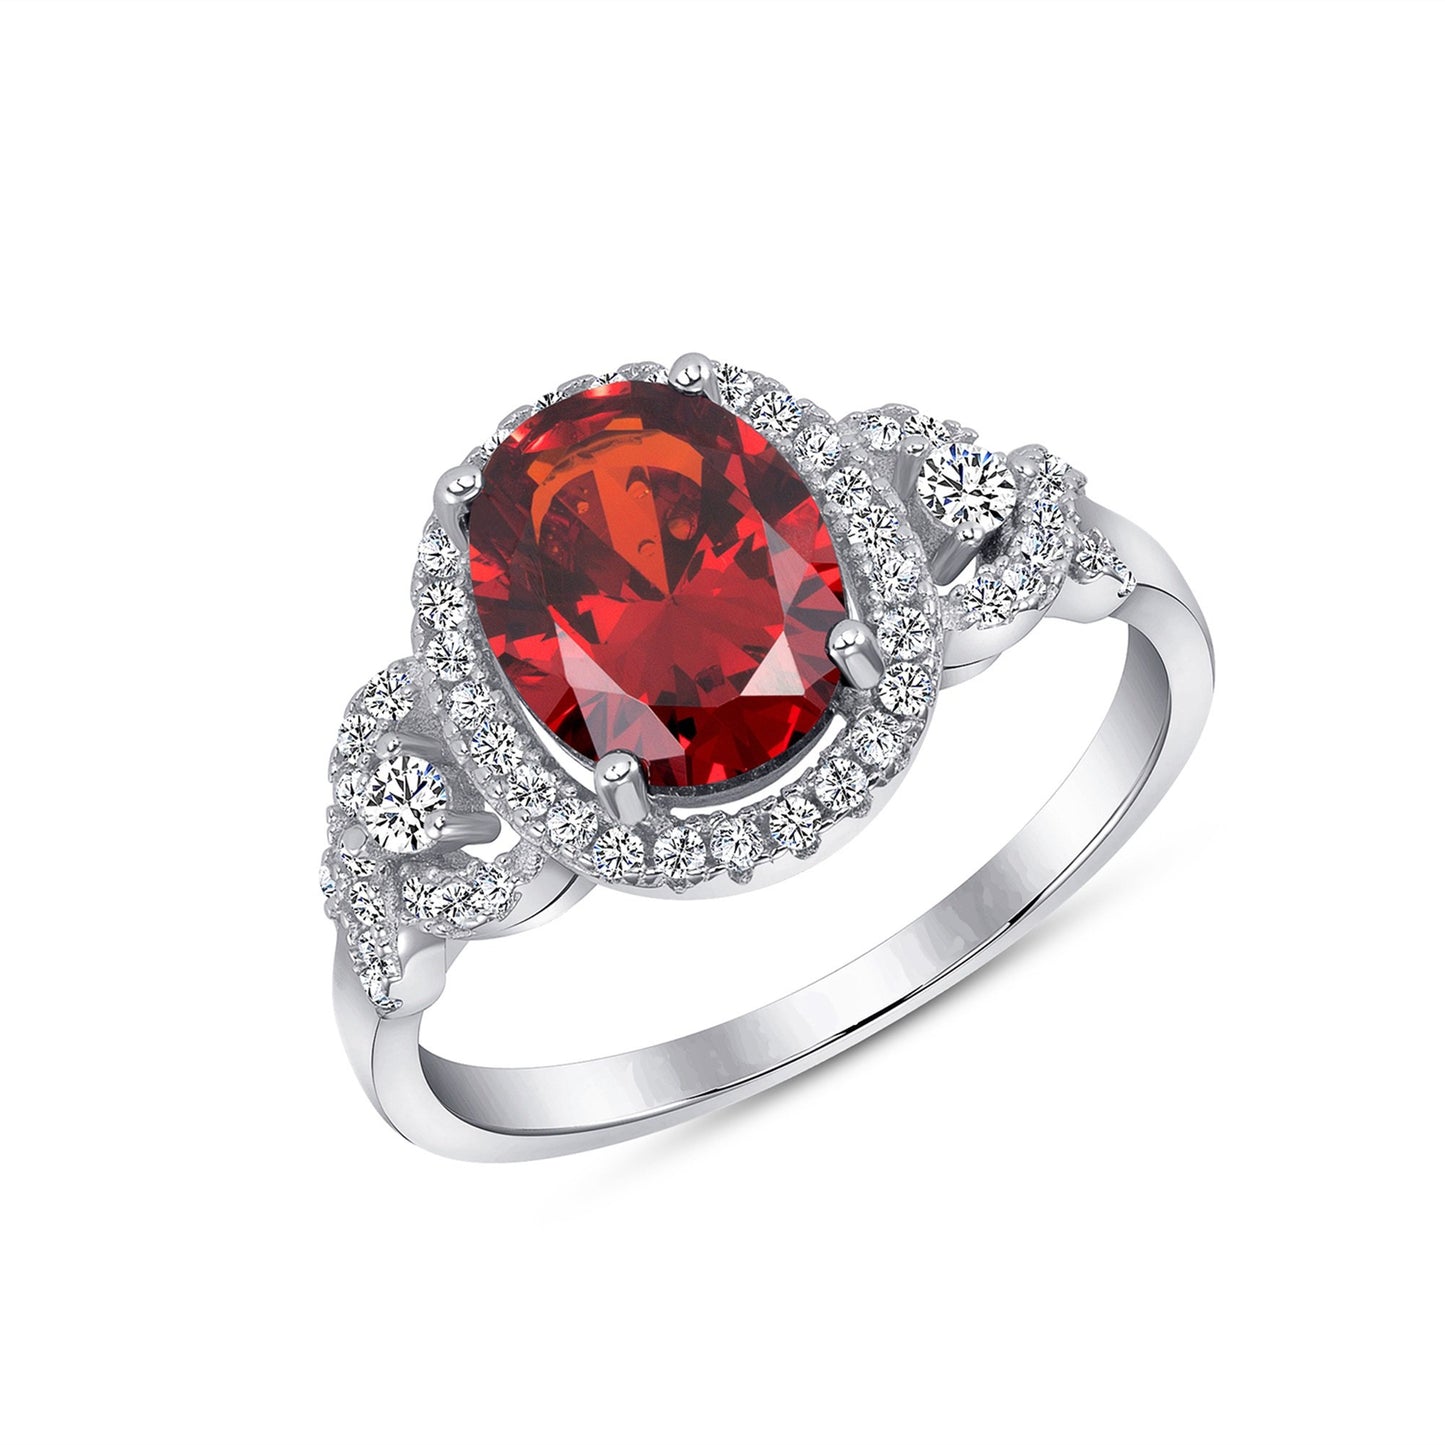 GR8573RED. Silver 925 Rhodium Plated Halo Style Red Garnet Cubic Zirconia Ring